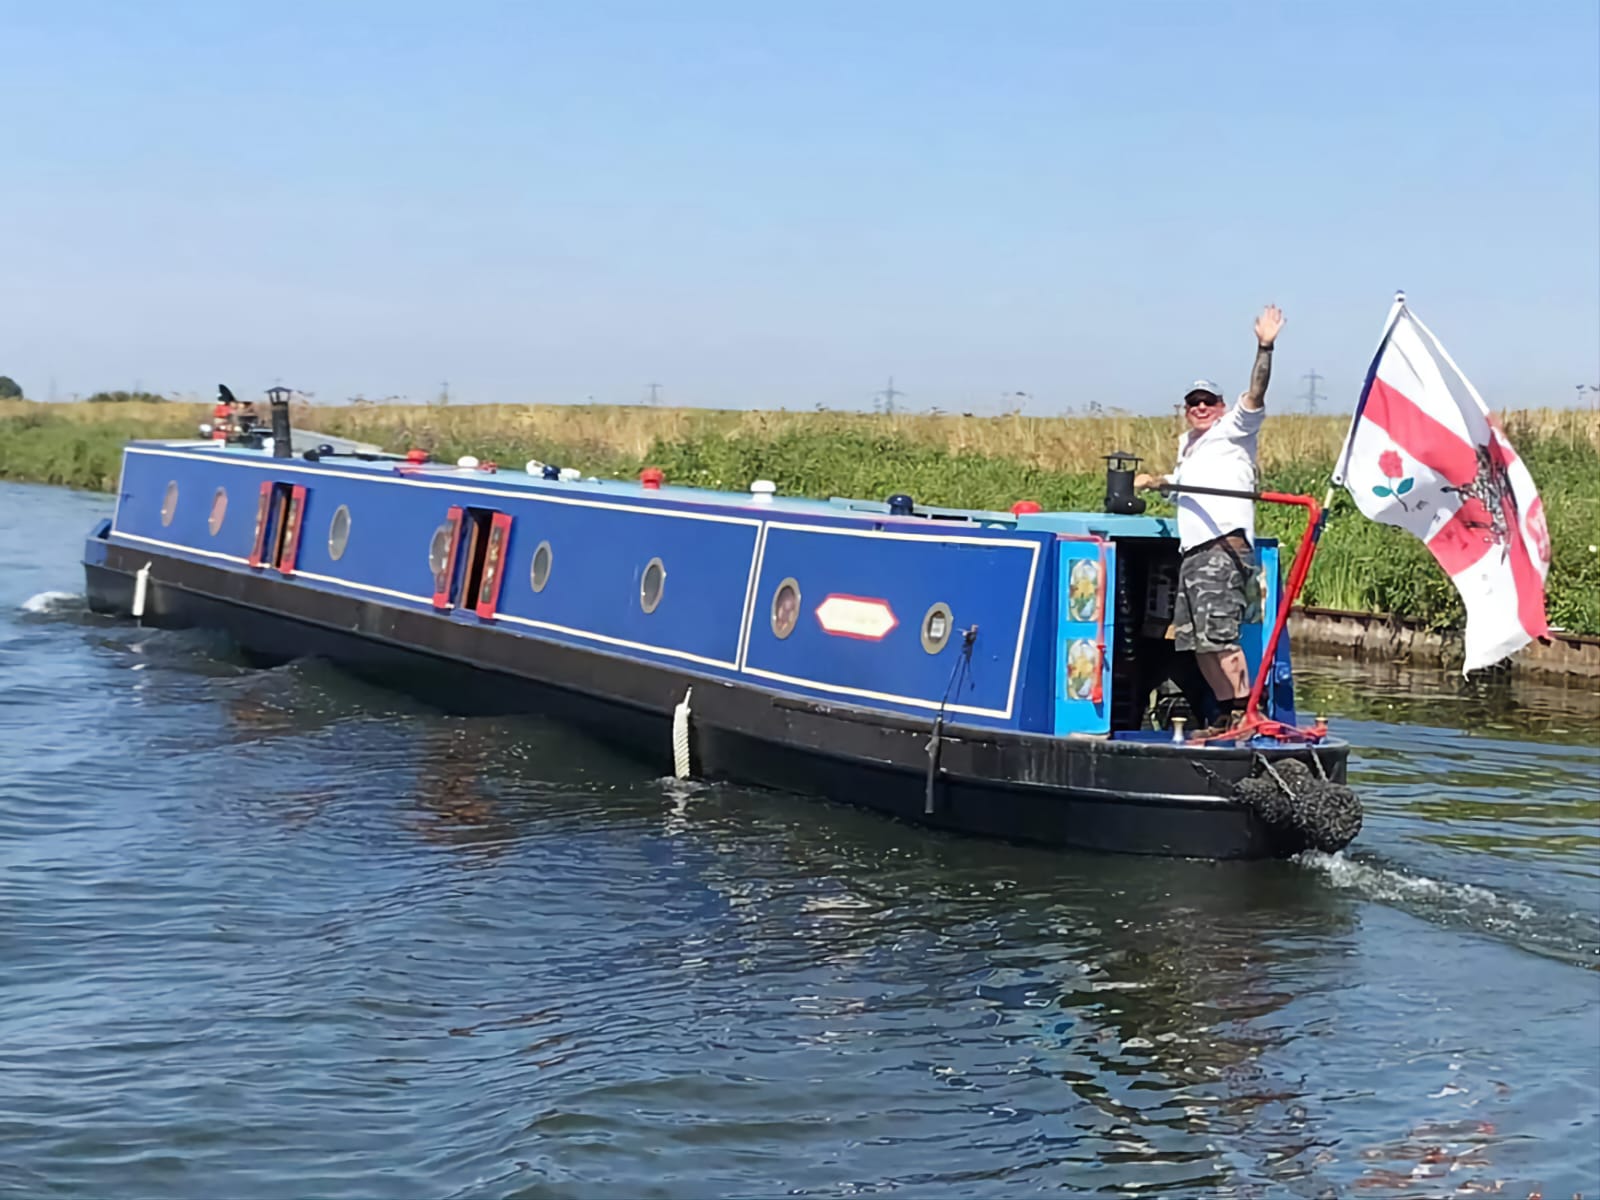 A man waving from the back of a narrowboat